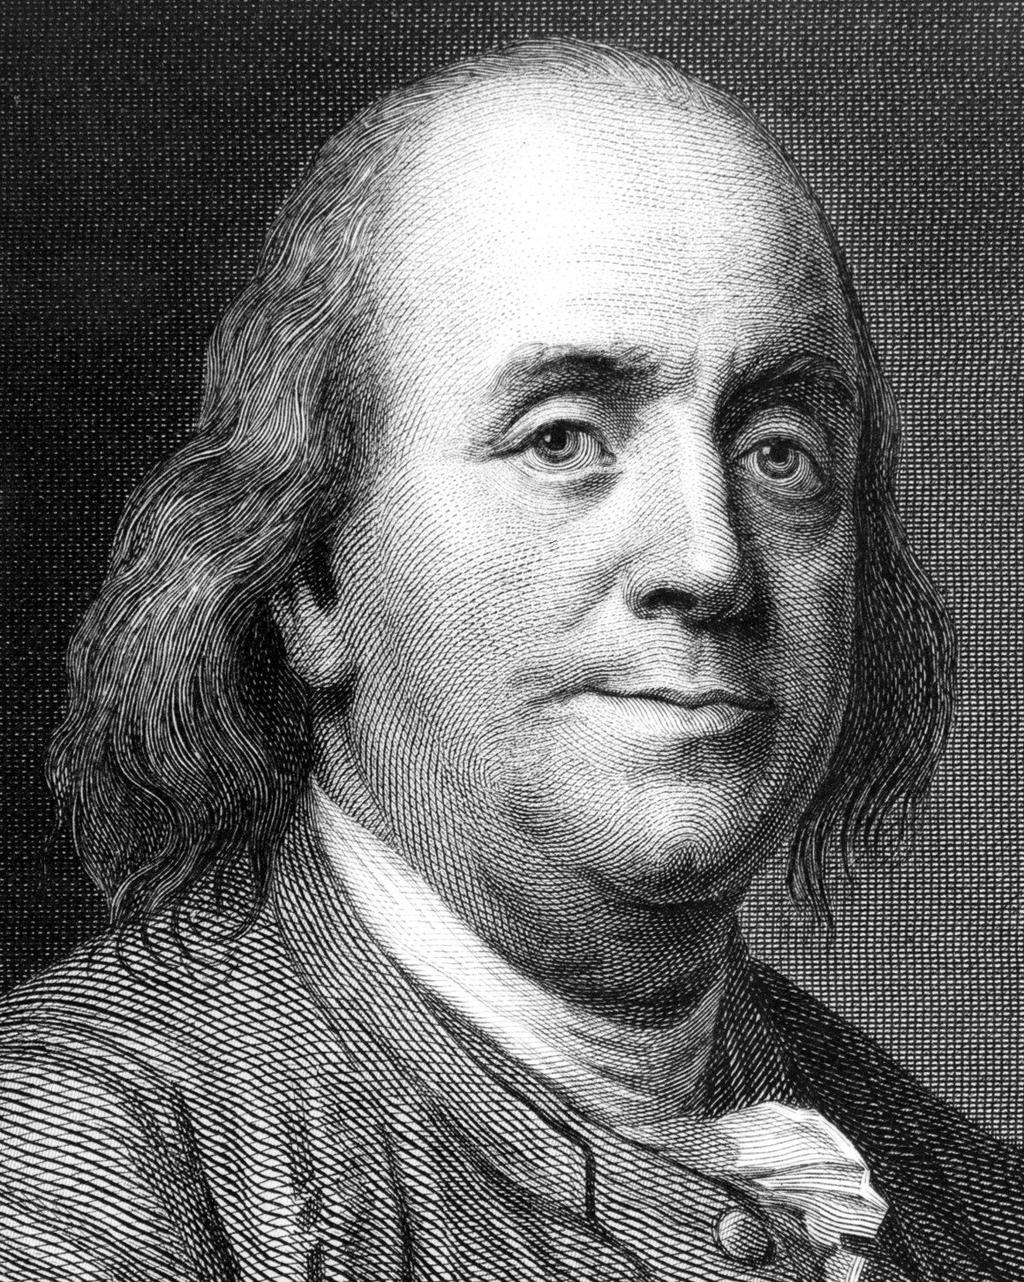 Benjamin Franklin Ben Franklin excelled in science, inventing, politics, writing, music, and diplomacy. He is one of the founding fathers of the United States of America.